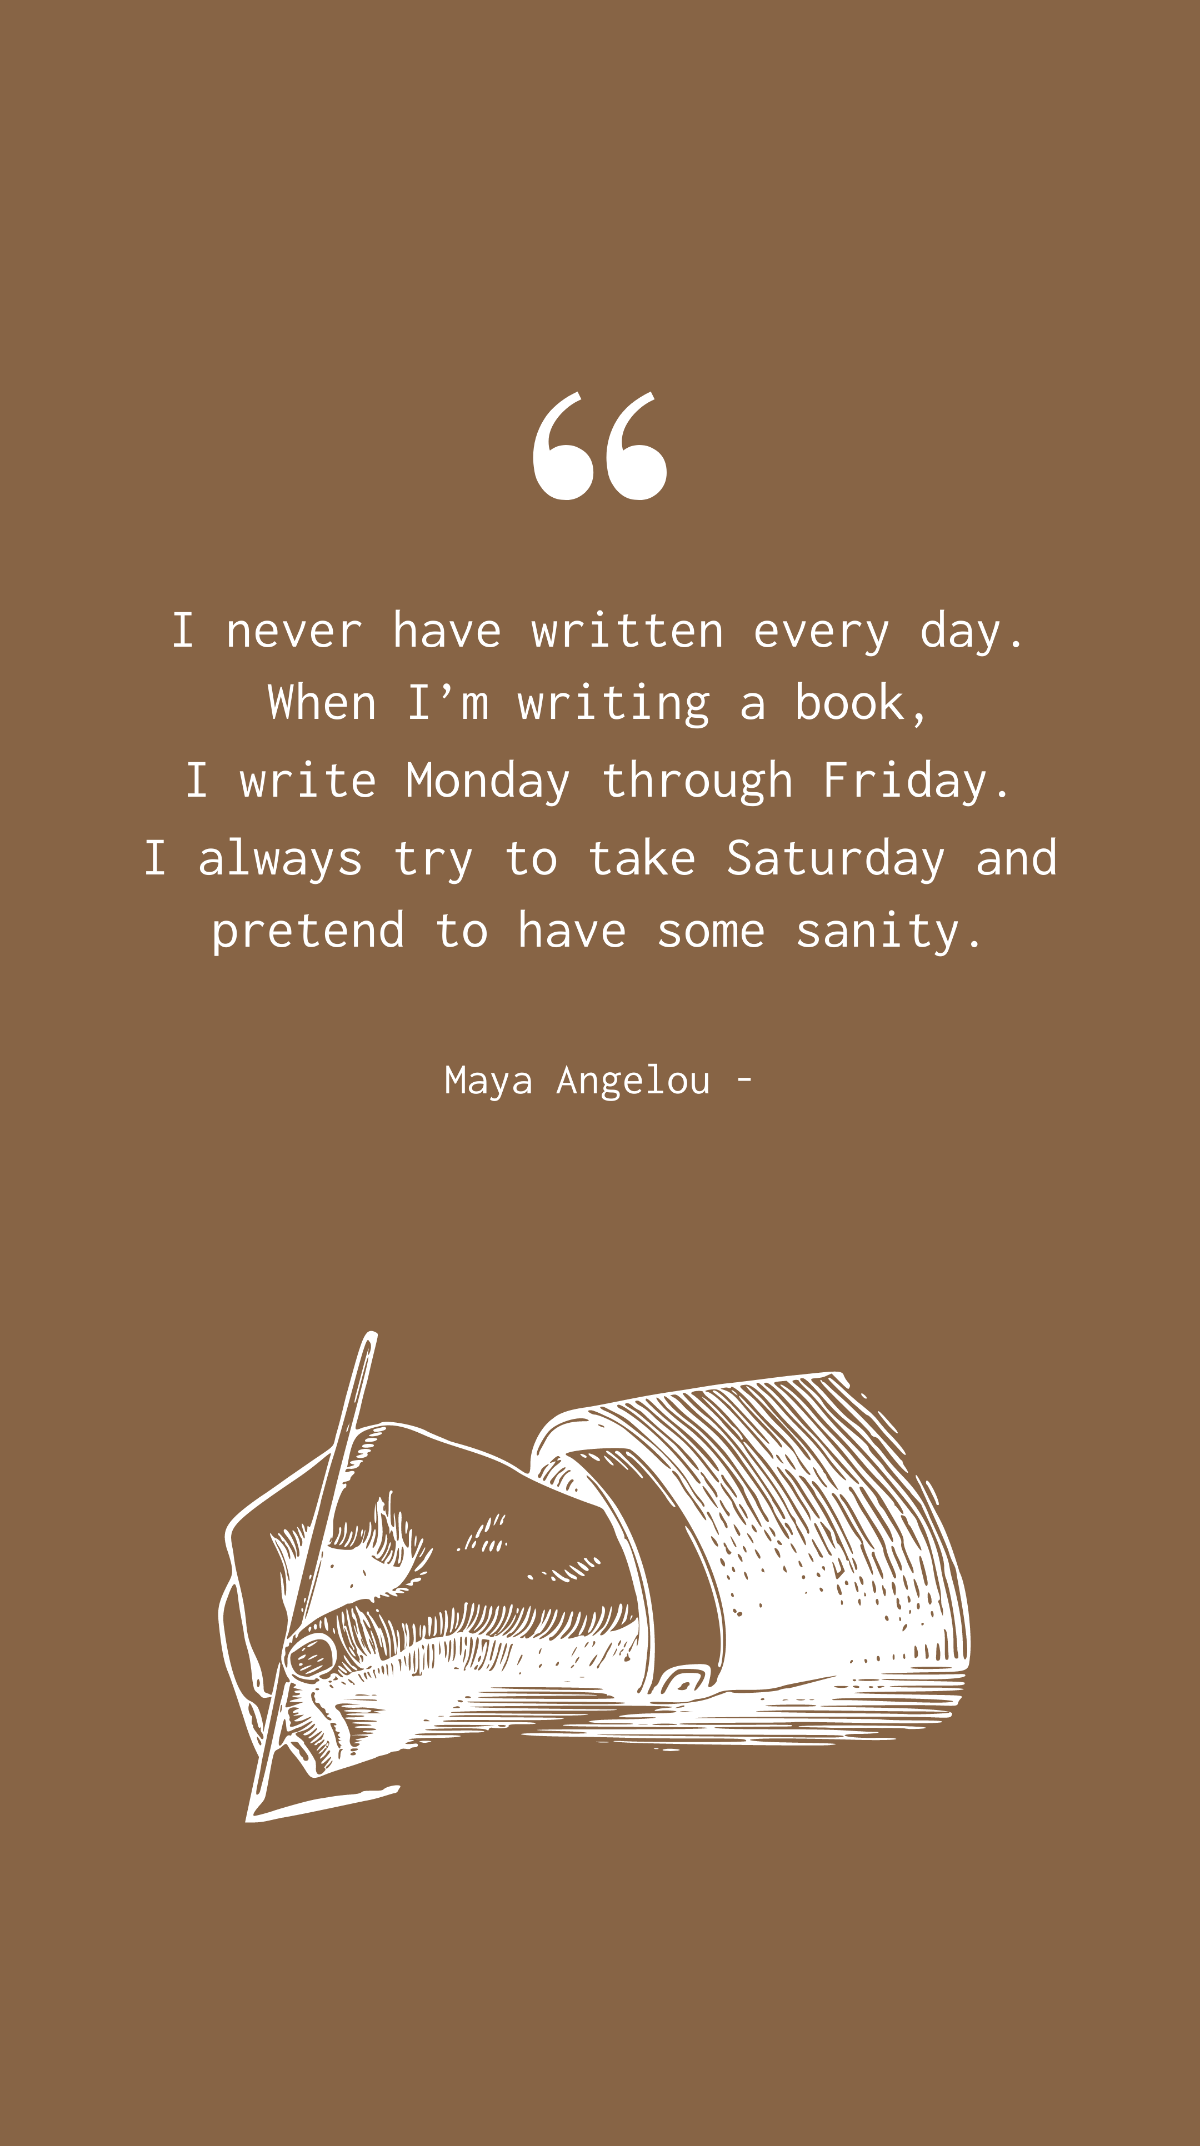 Free Maya Angelou - I never have written every day. When I’m writing a book, I write Monday through Friday. I always try to take Saturday and pretend to have some sanity. Template